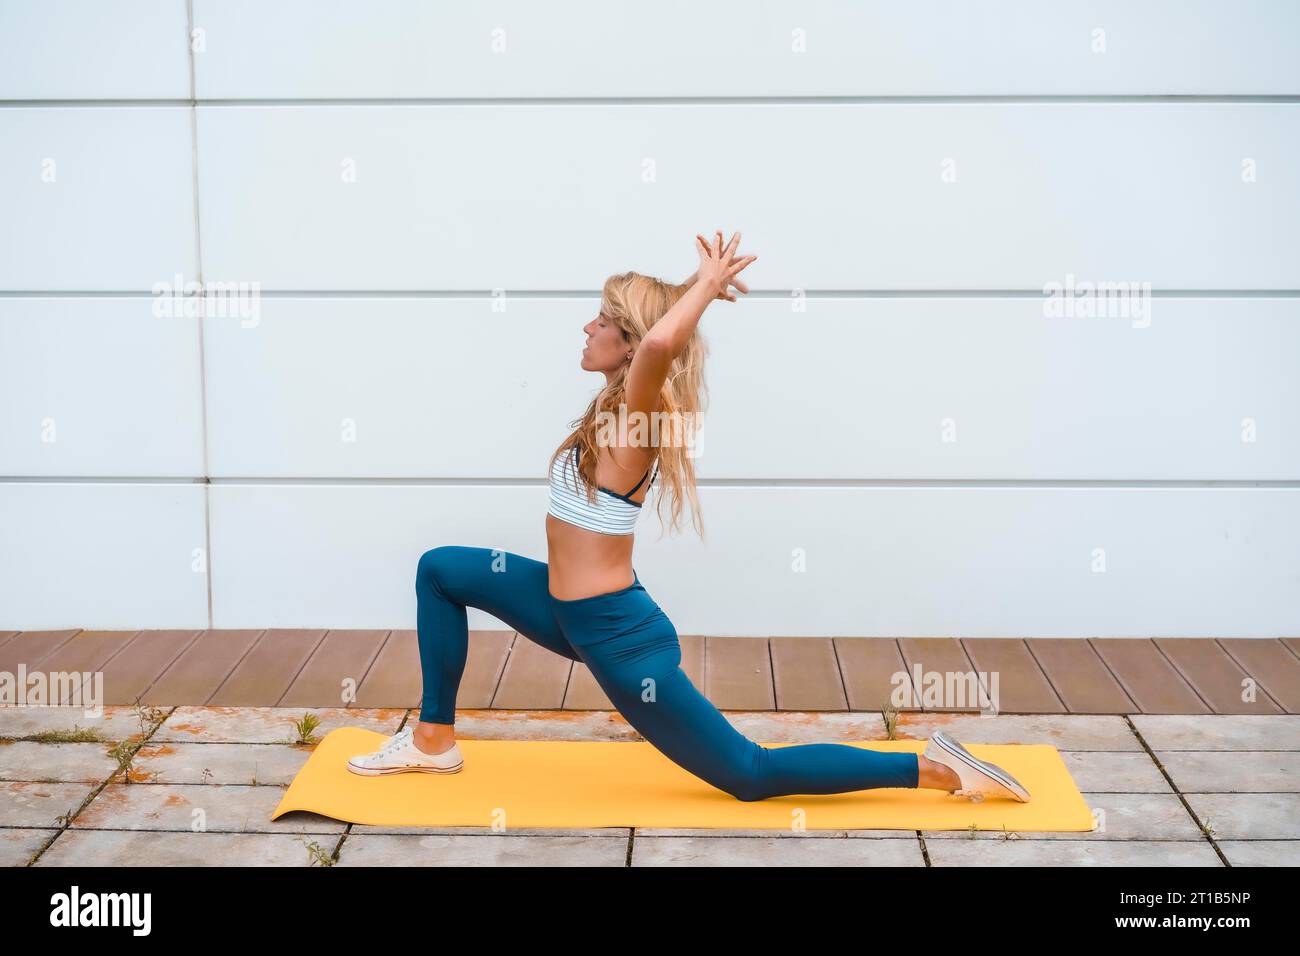 Young Fit Woman Doing a Yoga Pose Standing with One Leg Raised Up